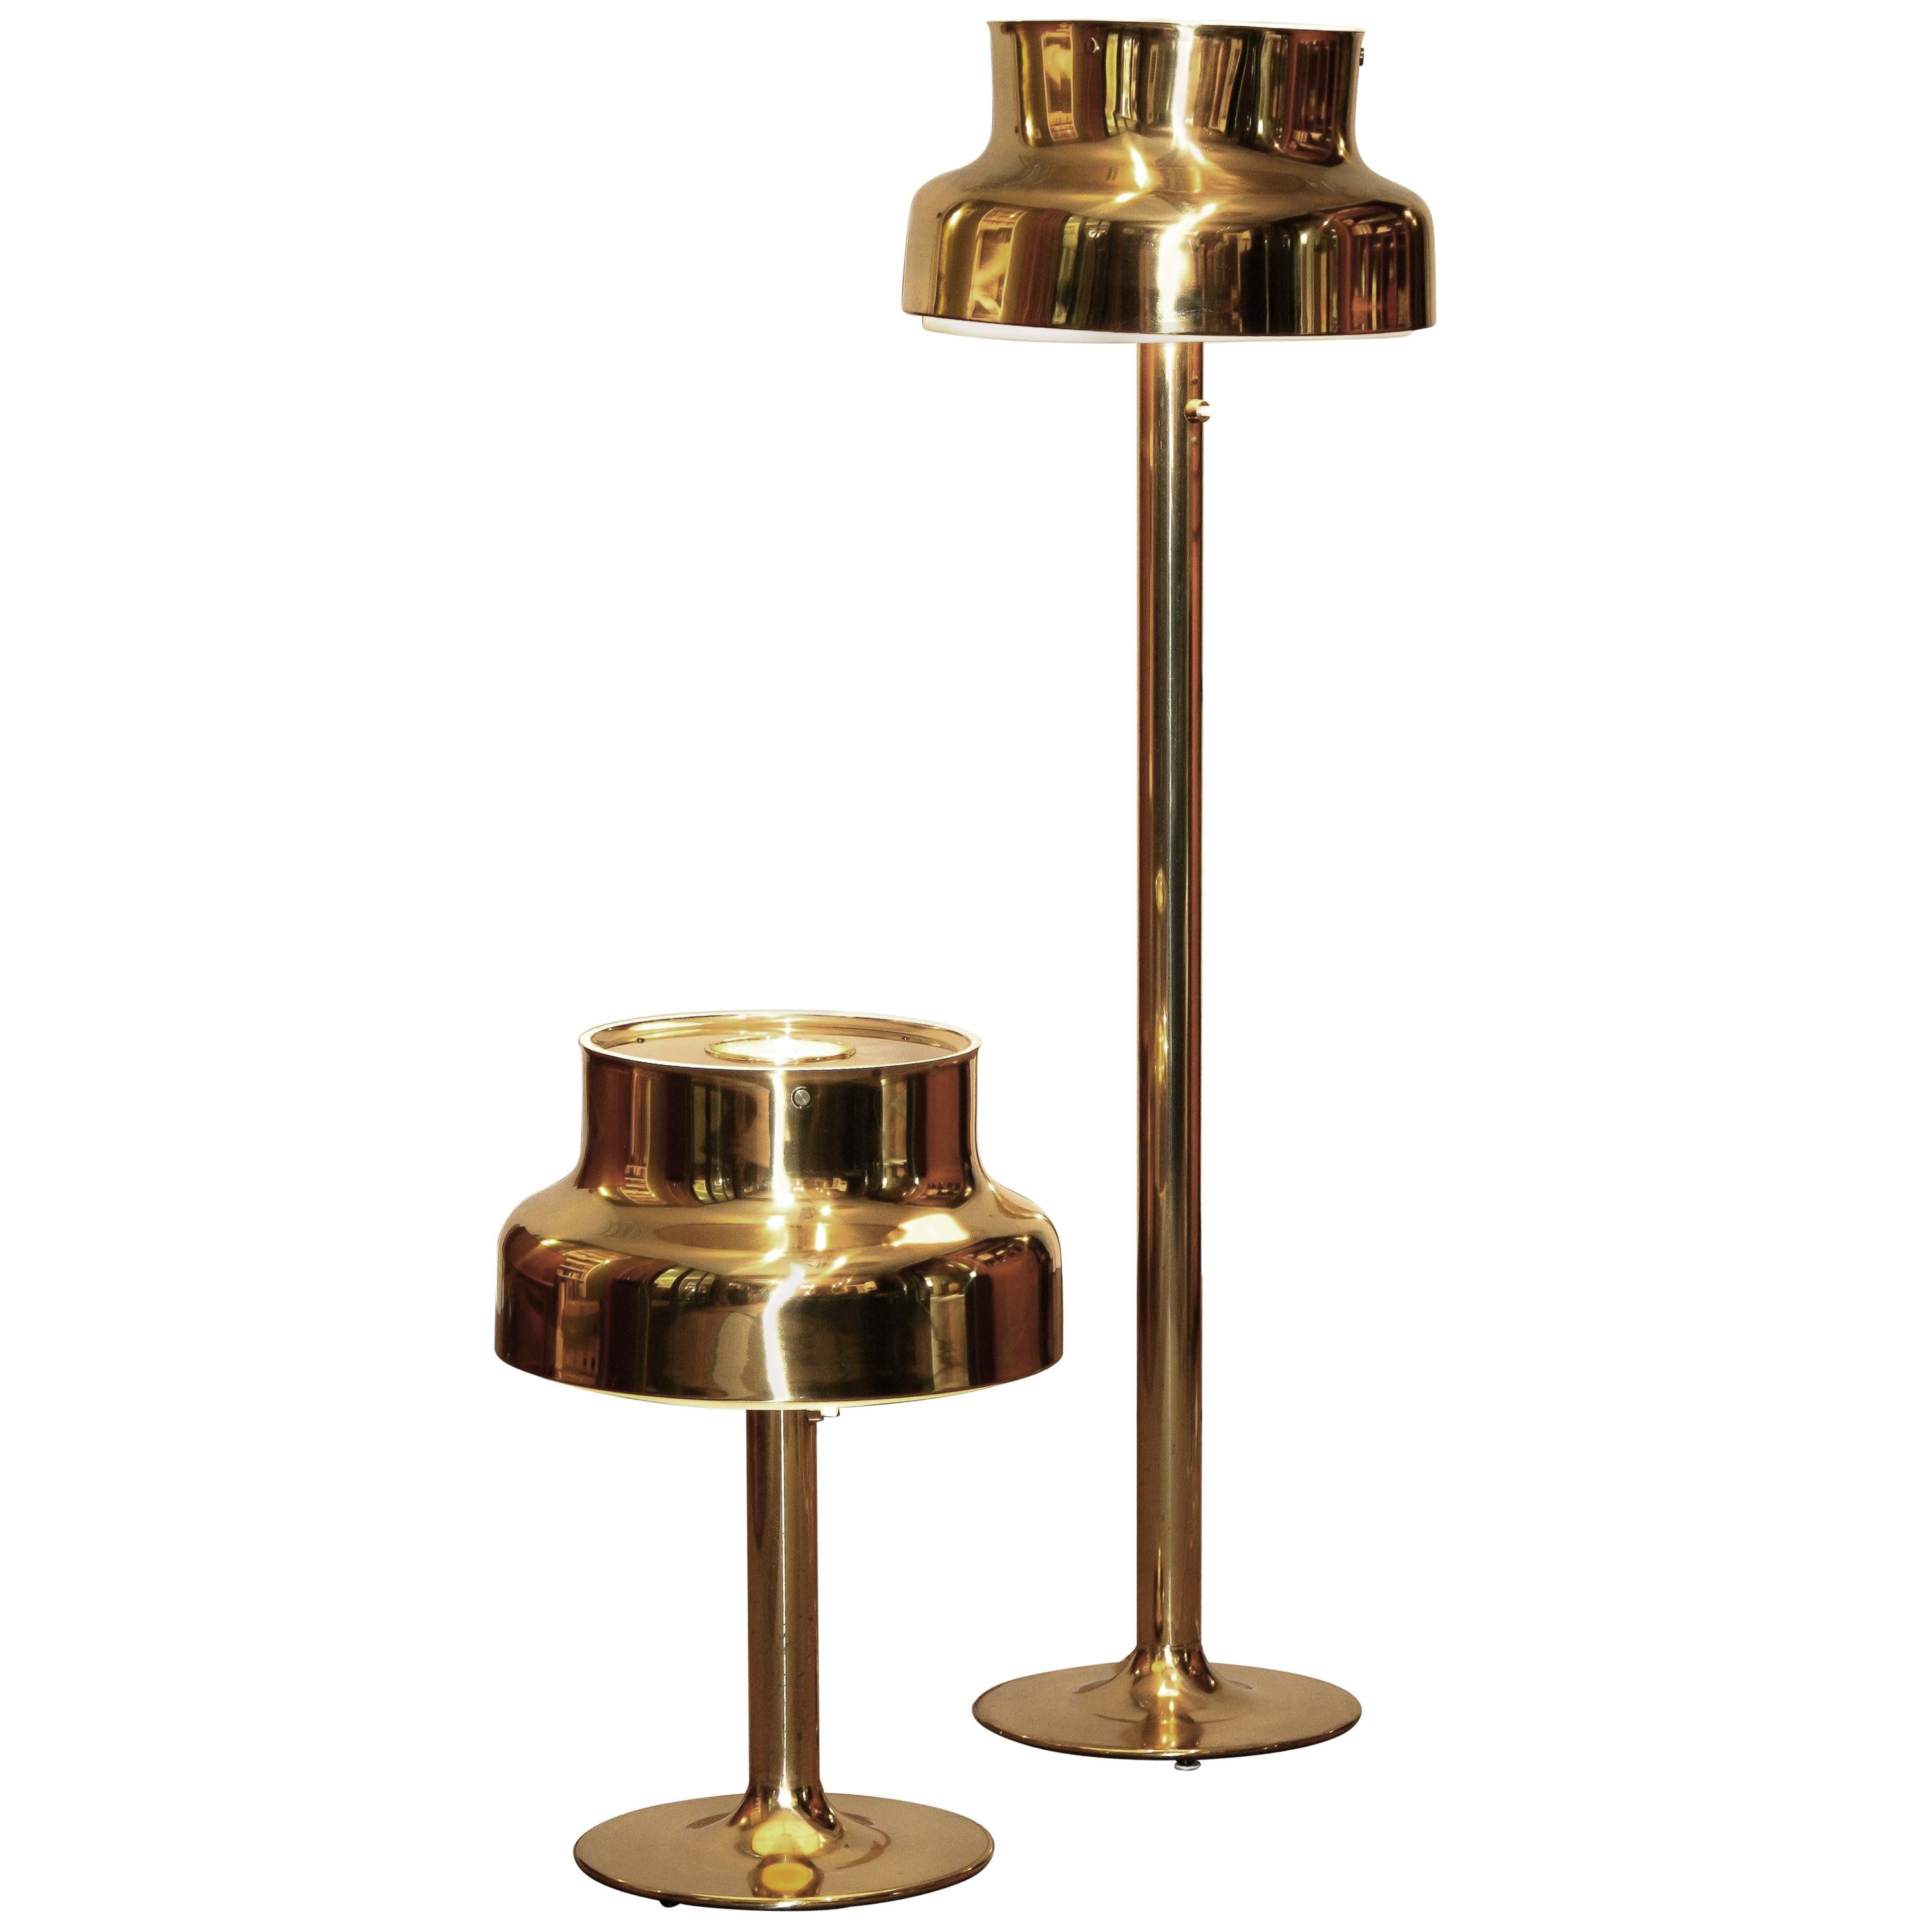 1960s, Golden / Brass Floor and Table Lamp by Anders Pehrson "Bumling", Lyktan